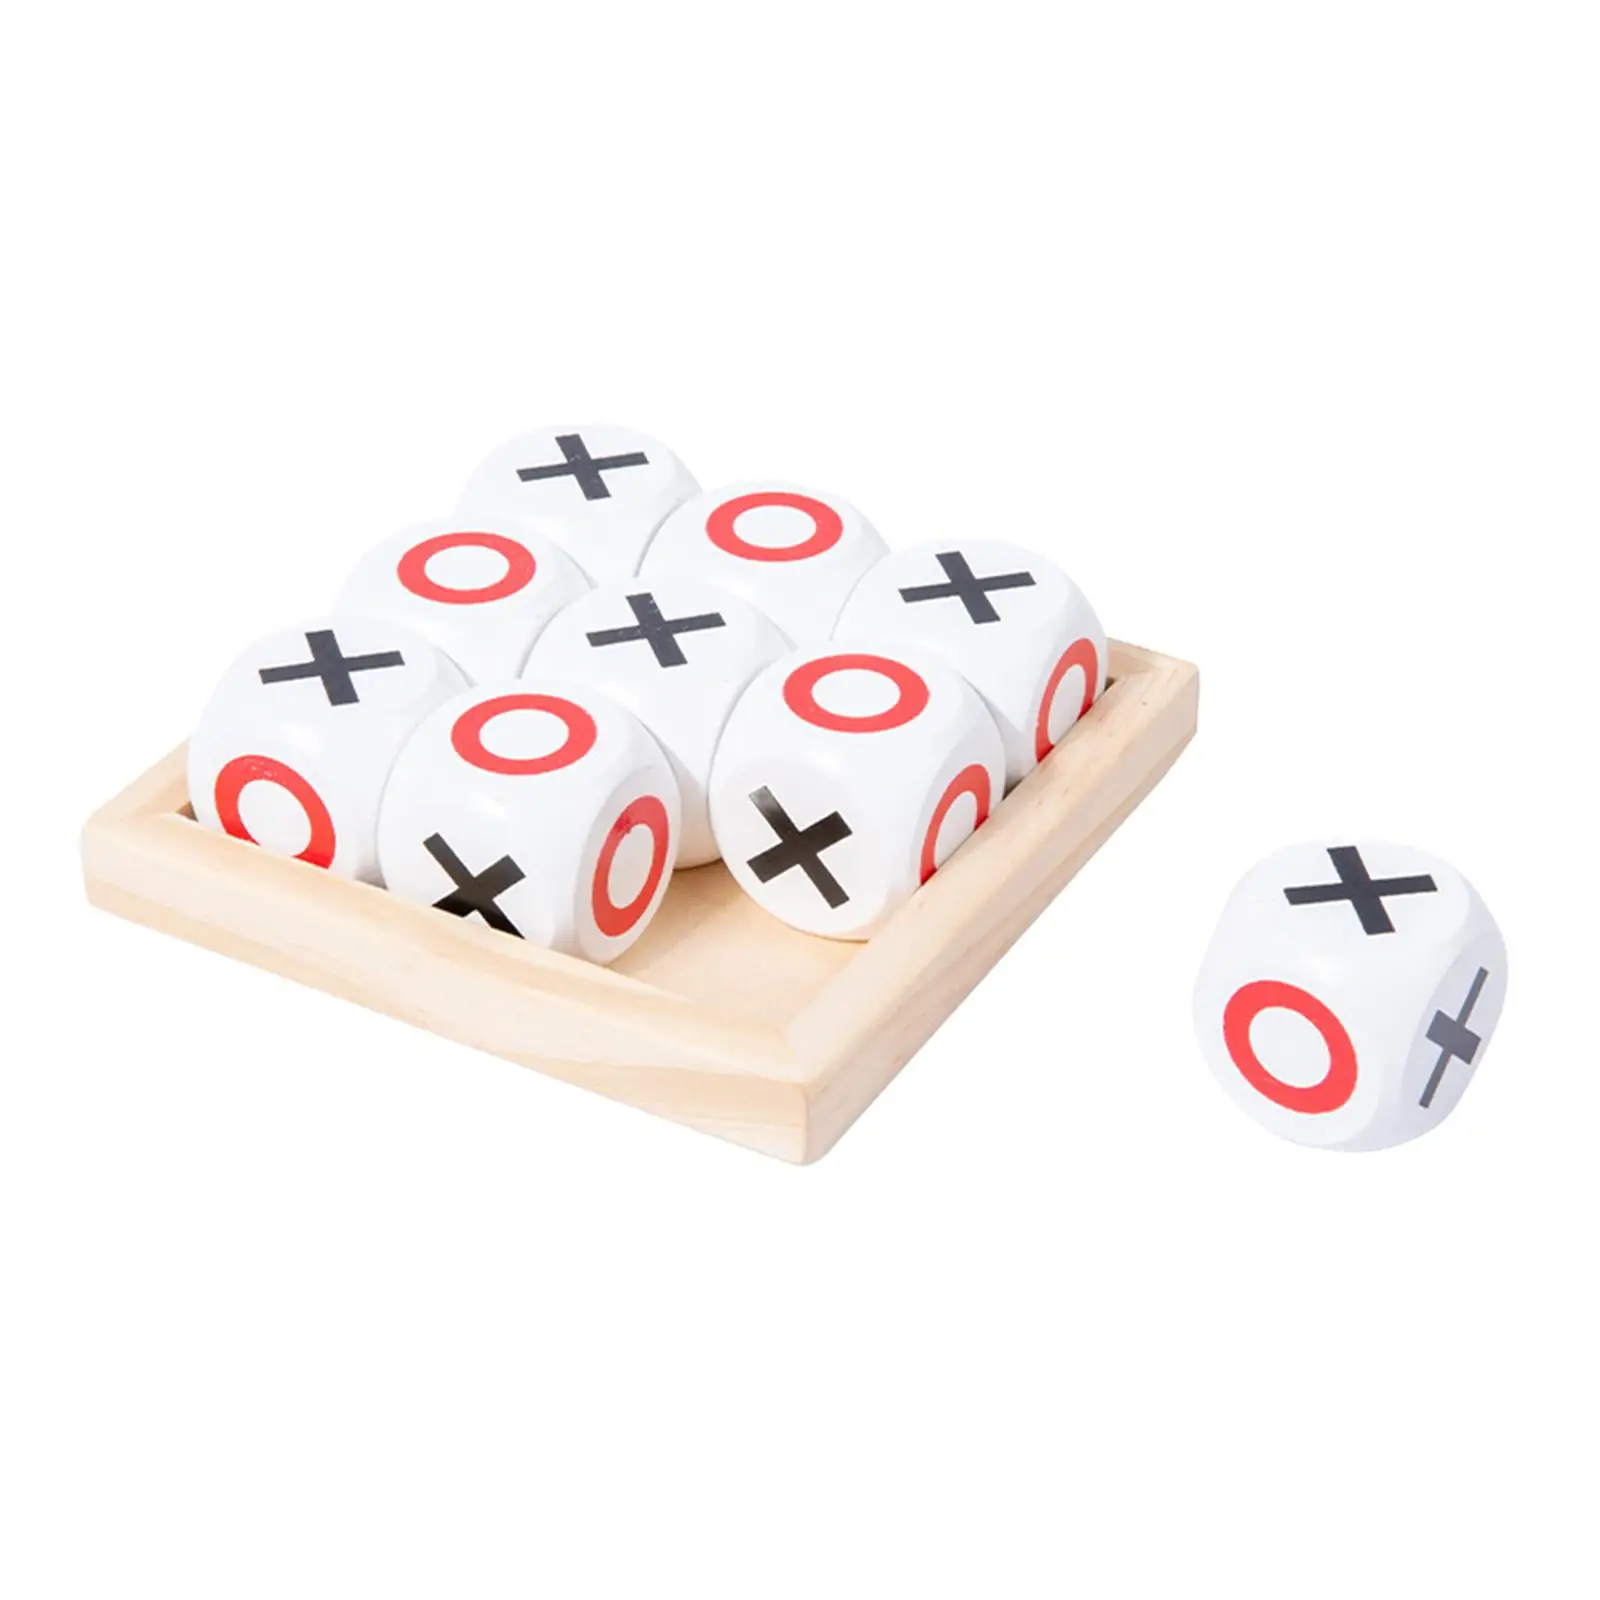 Tic TAC Toe Board Game Xoxo Chess Board Game Fun Hand Crafted Noughts and Crosses for Kids Outdoor Indoor Adults Gifts Travel